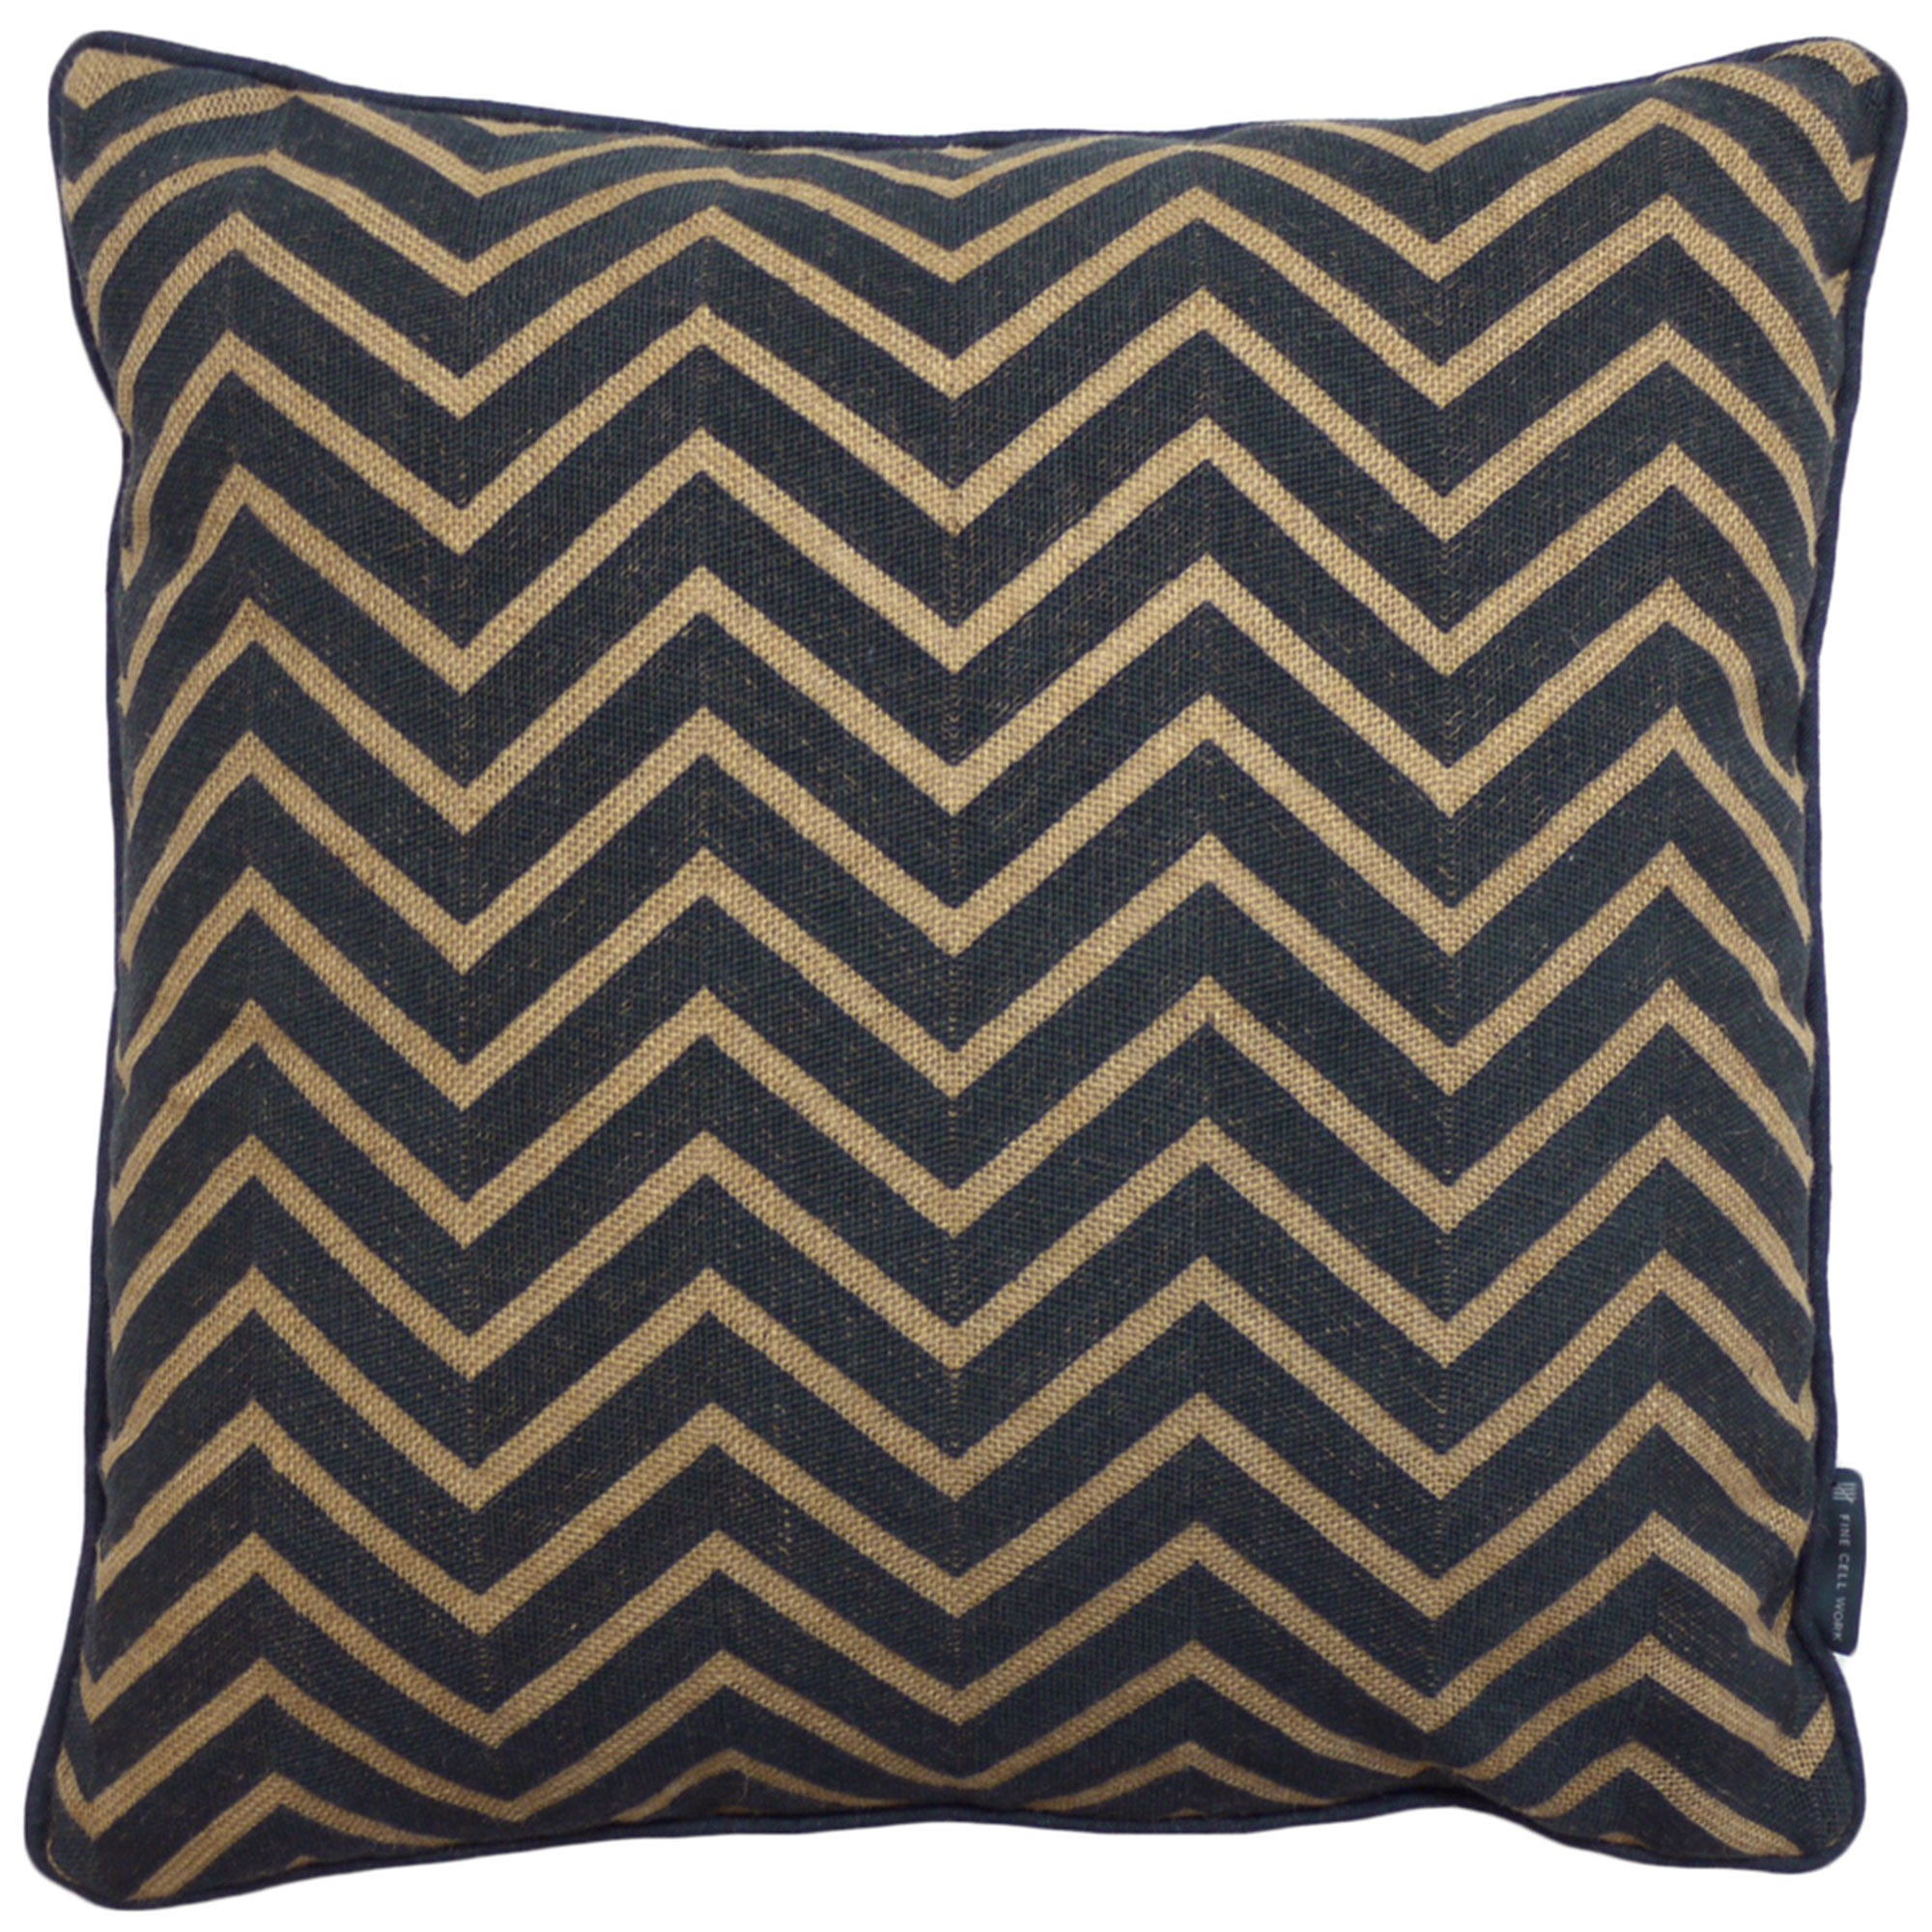 Hand stitched charcoal dark grey zig-zag chevron pattern on neutral hessian canvas. Finished as a 20x20" cushion, piped in matching grey.